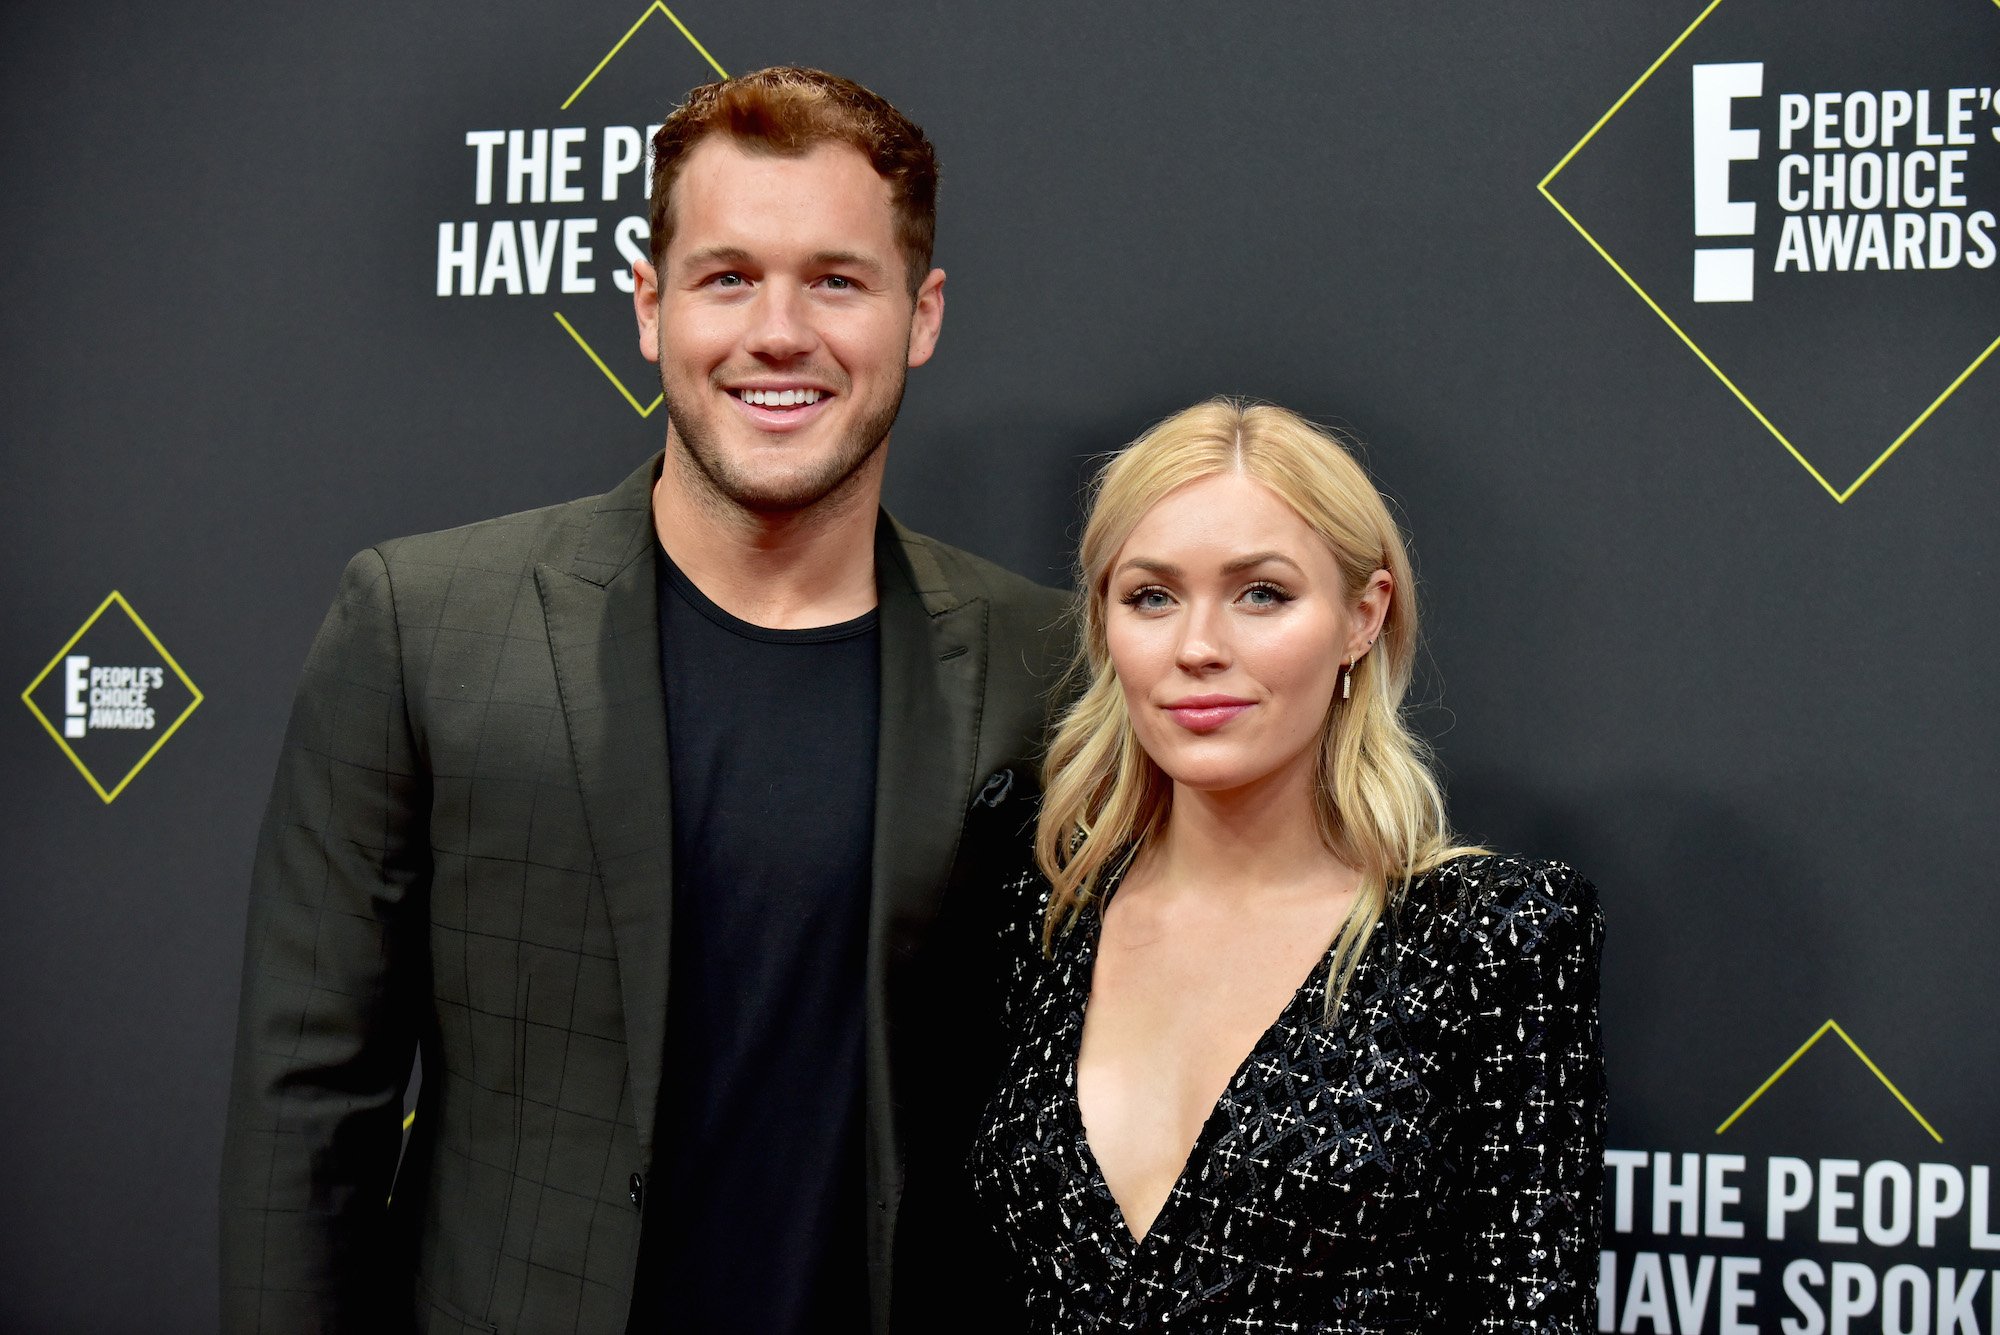 (L-R) Colton Underwood and Cassie Randolph attend the 2019 E! People's Choice Awards 